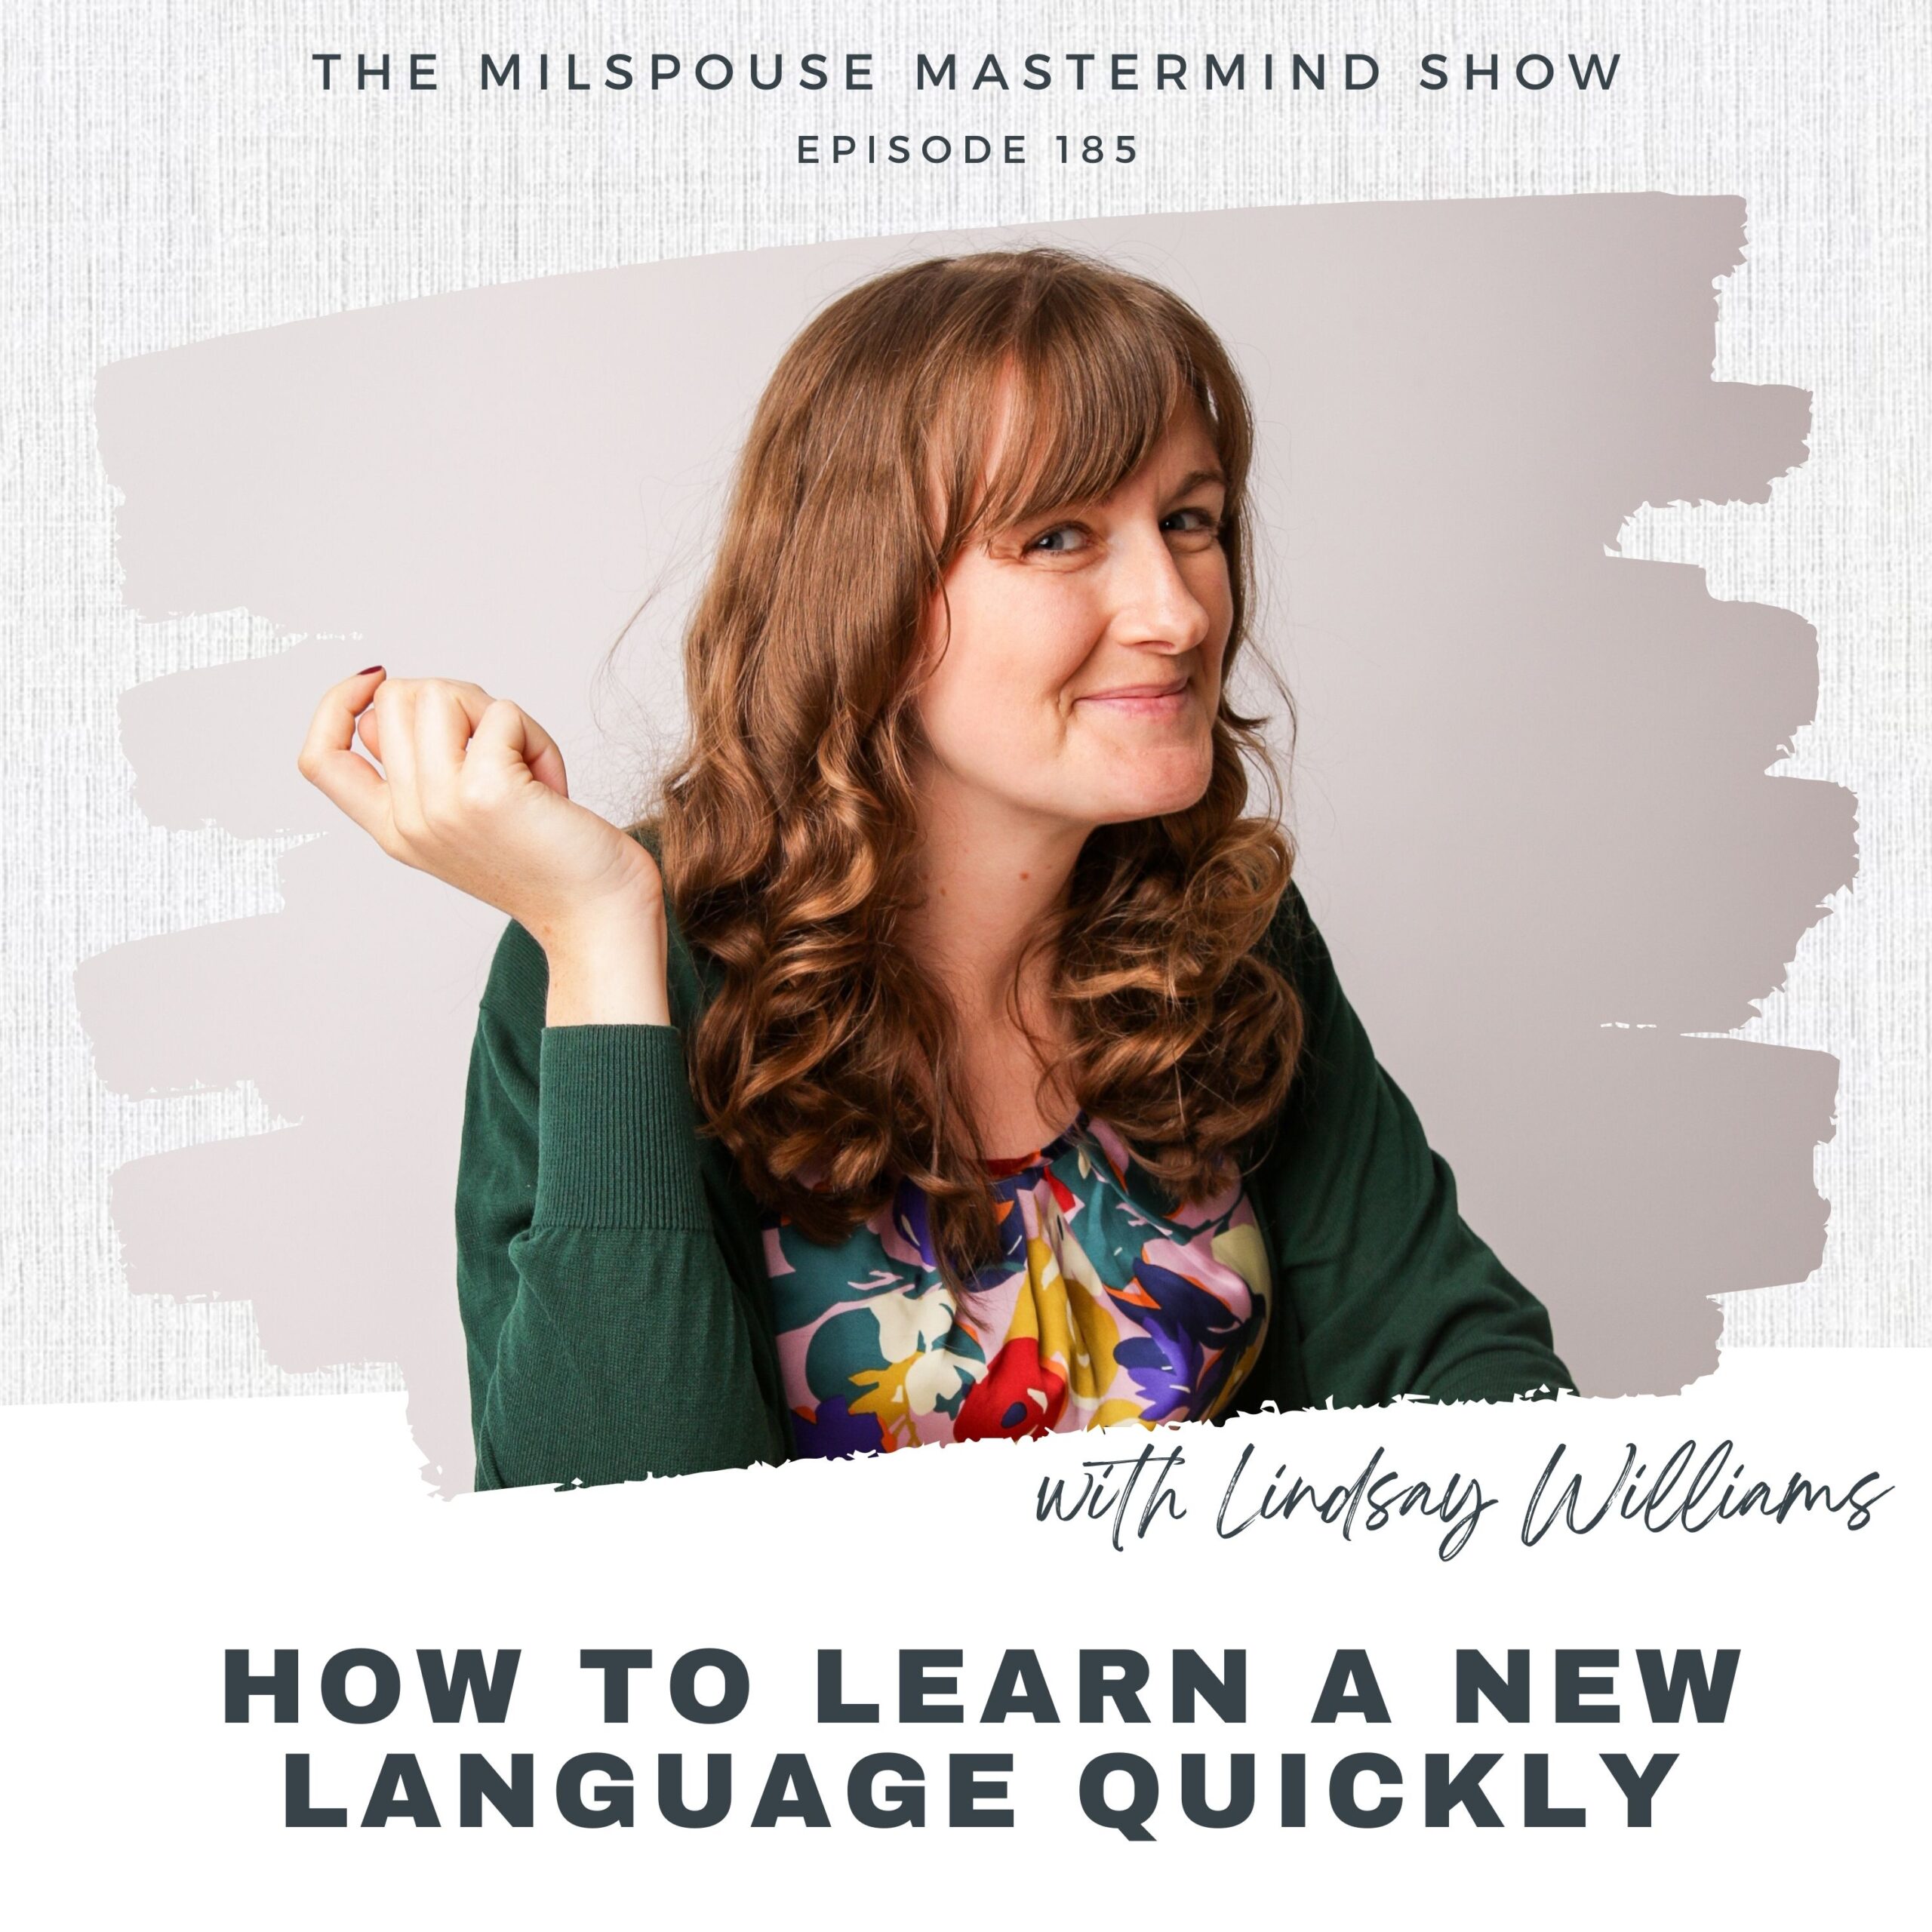 How to Learn A New Language Quickly